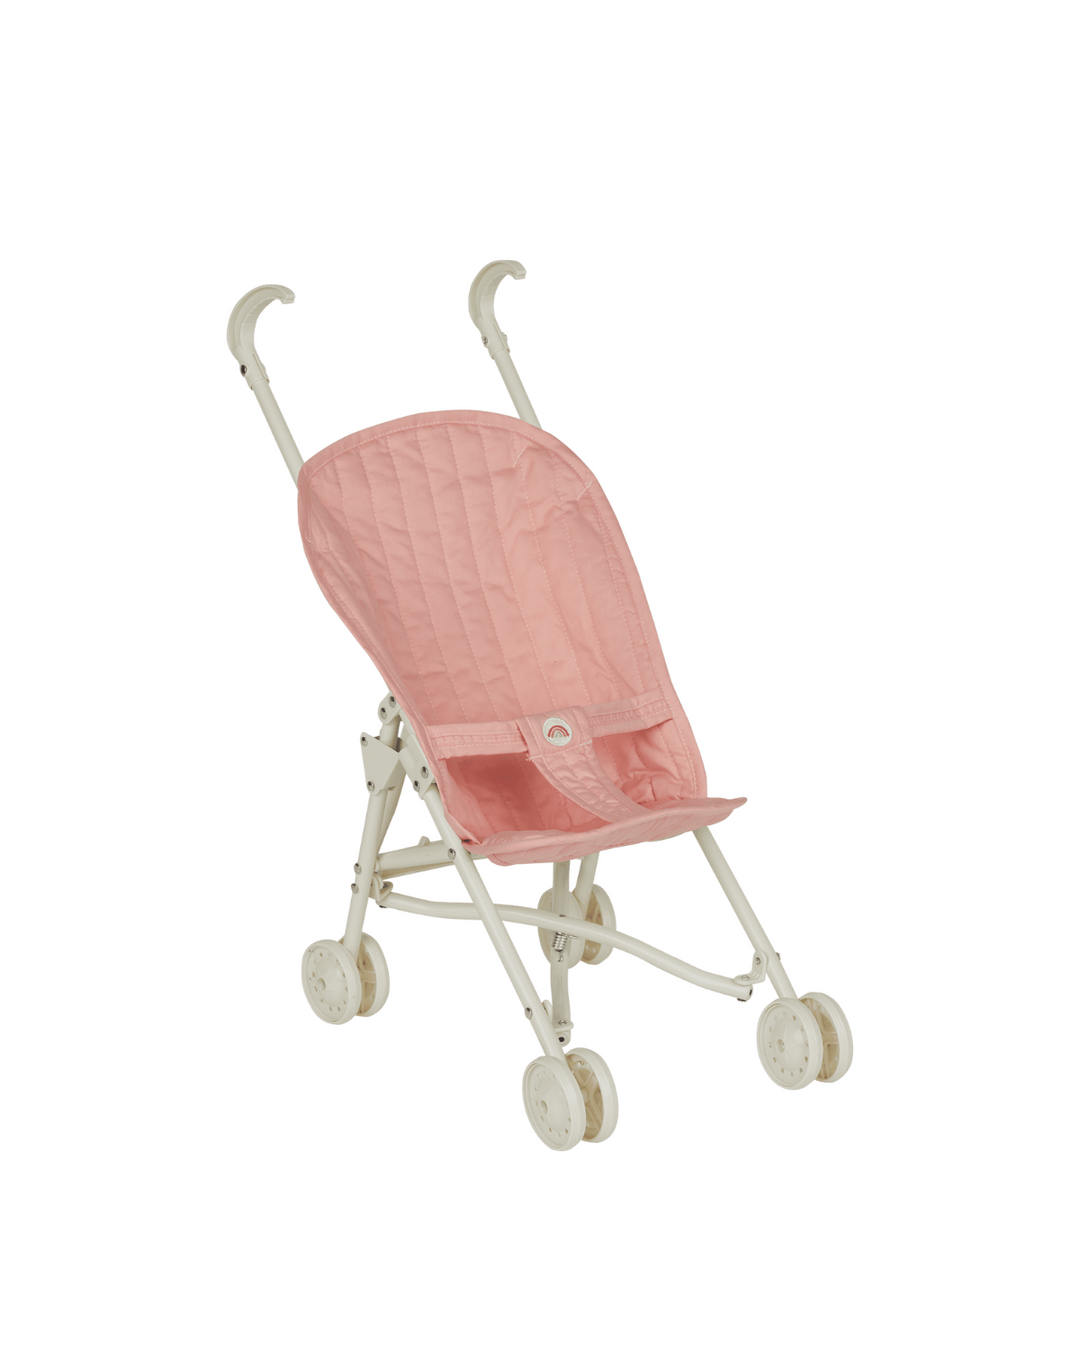 Doll Sollie Stroller - Rose: Charming Play Companion